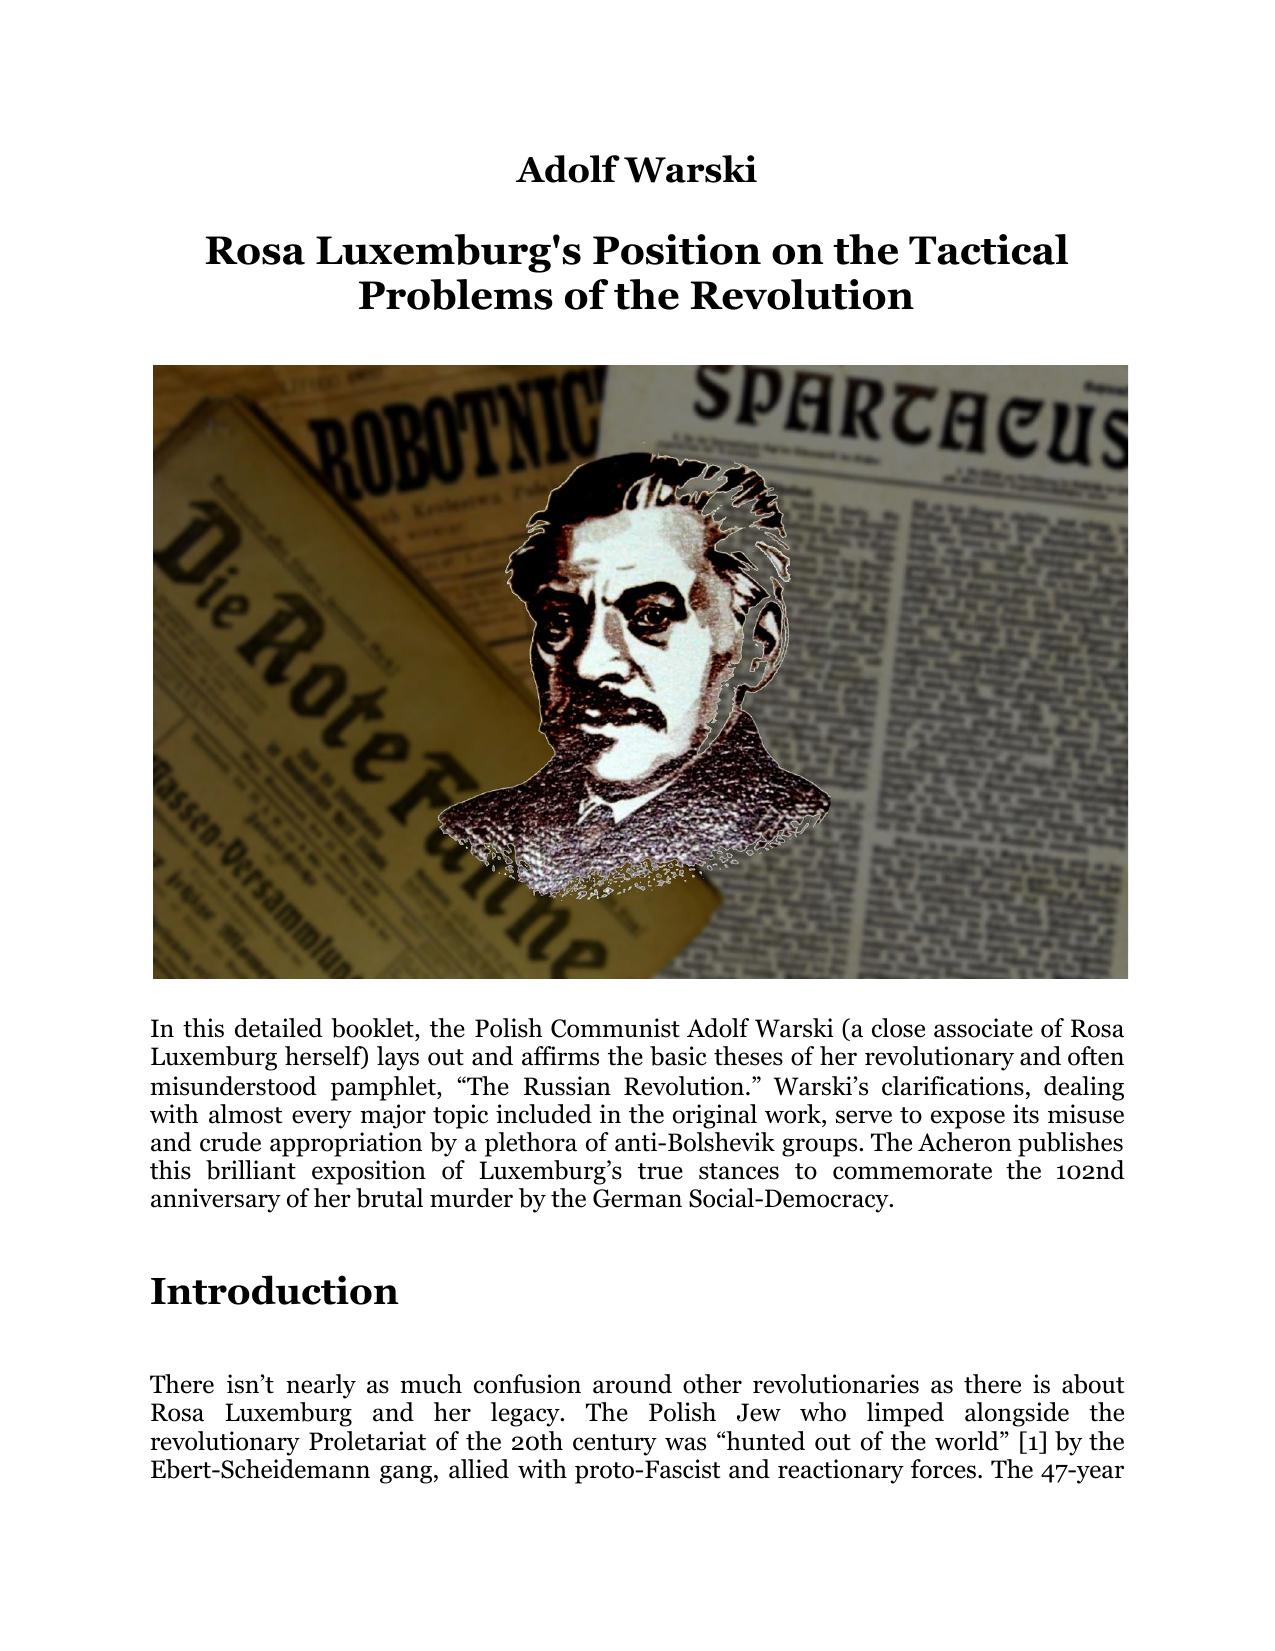 Rosa Luxemburg’s Position On The Tactical Problems Of The Revolution